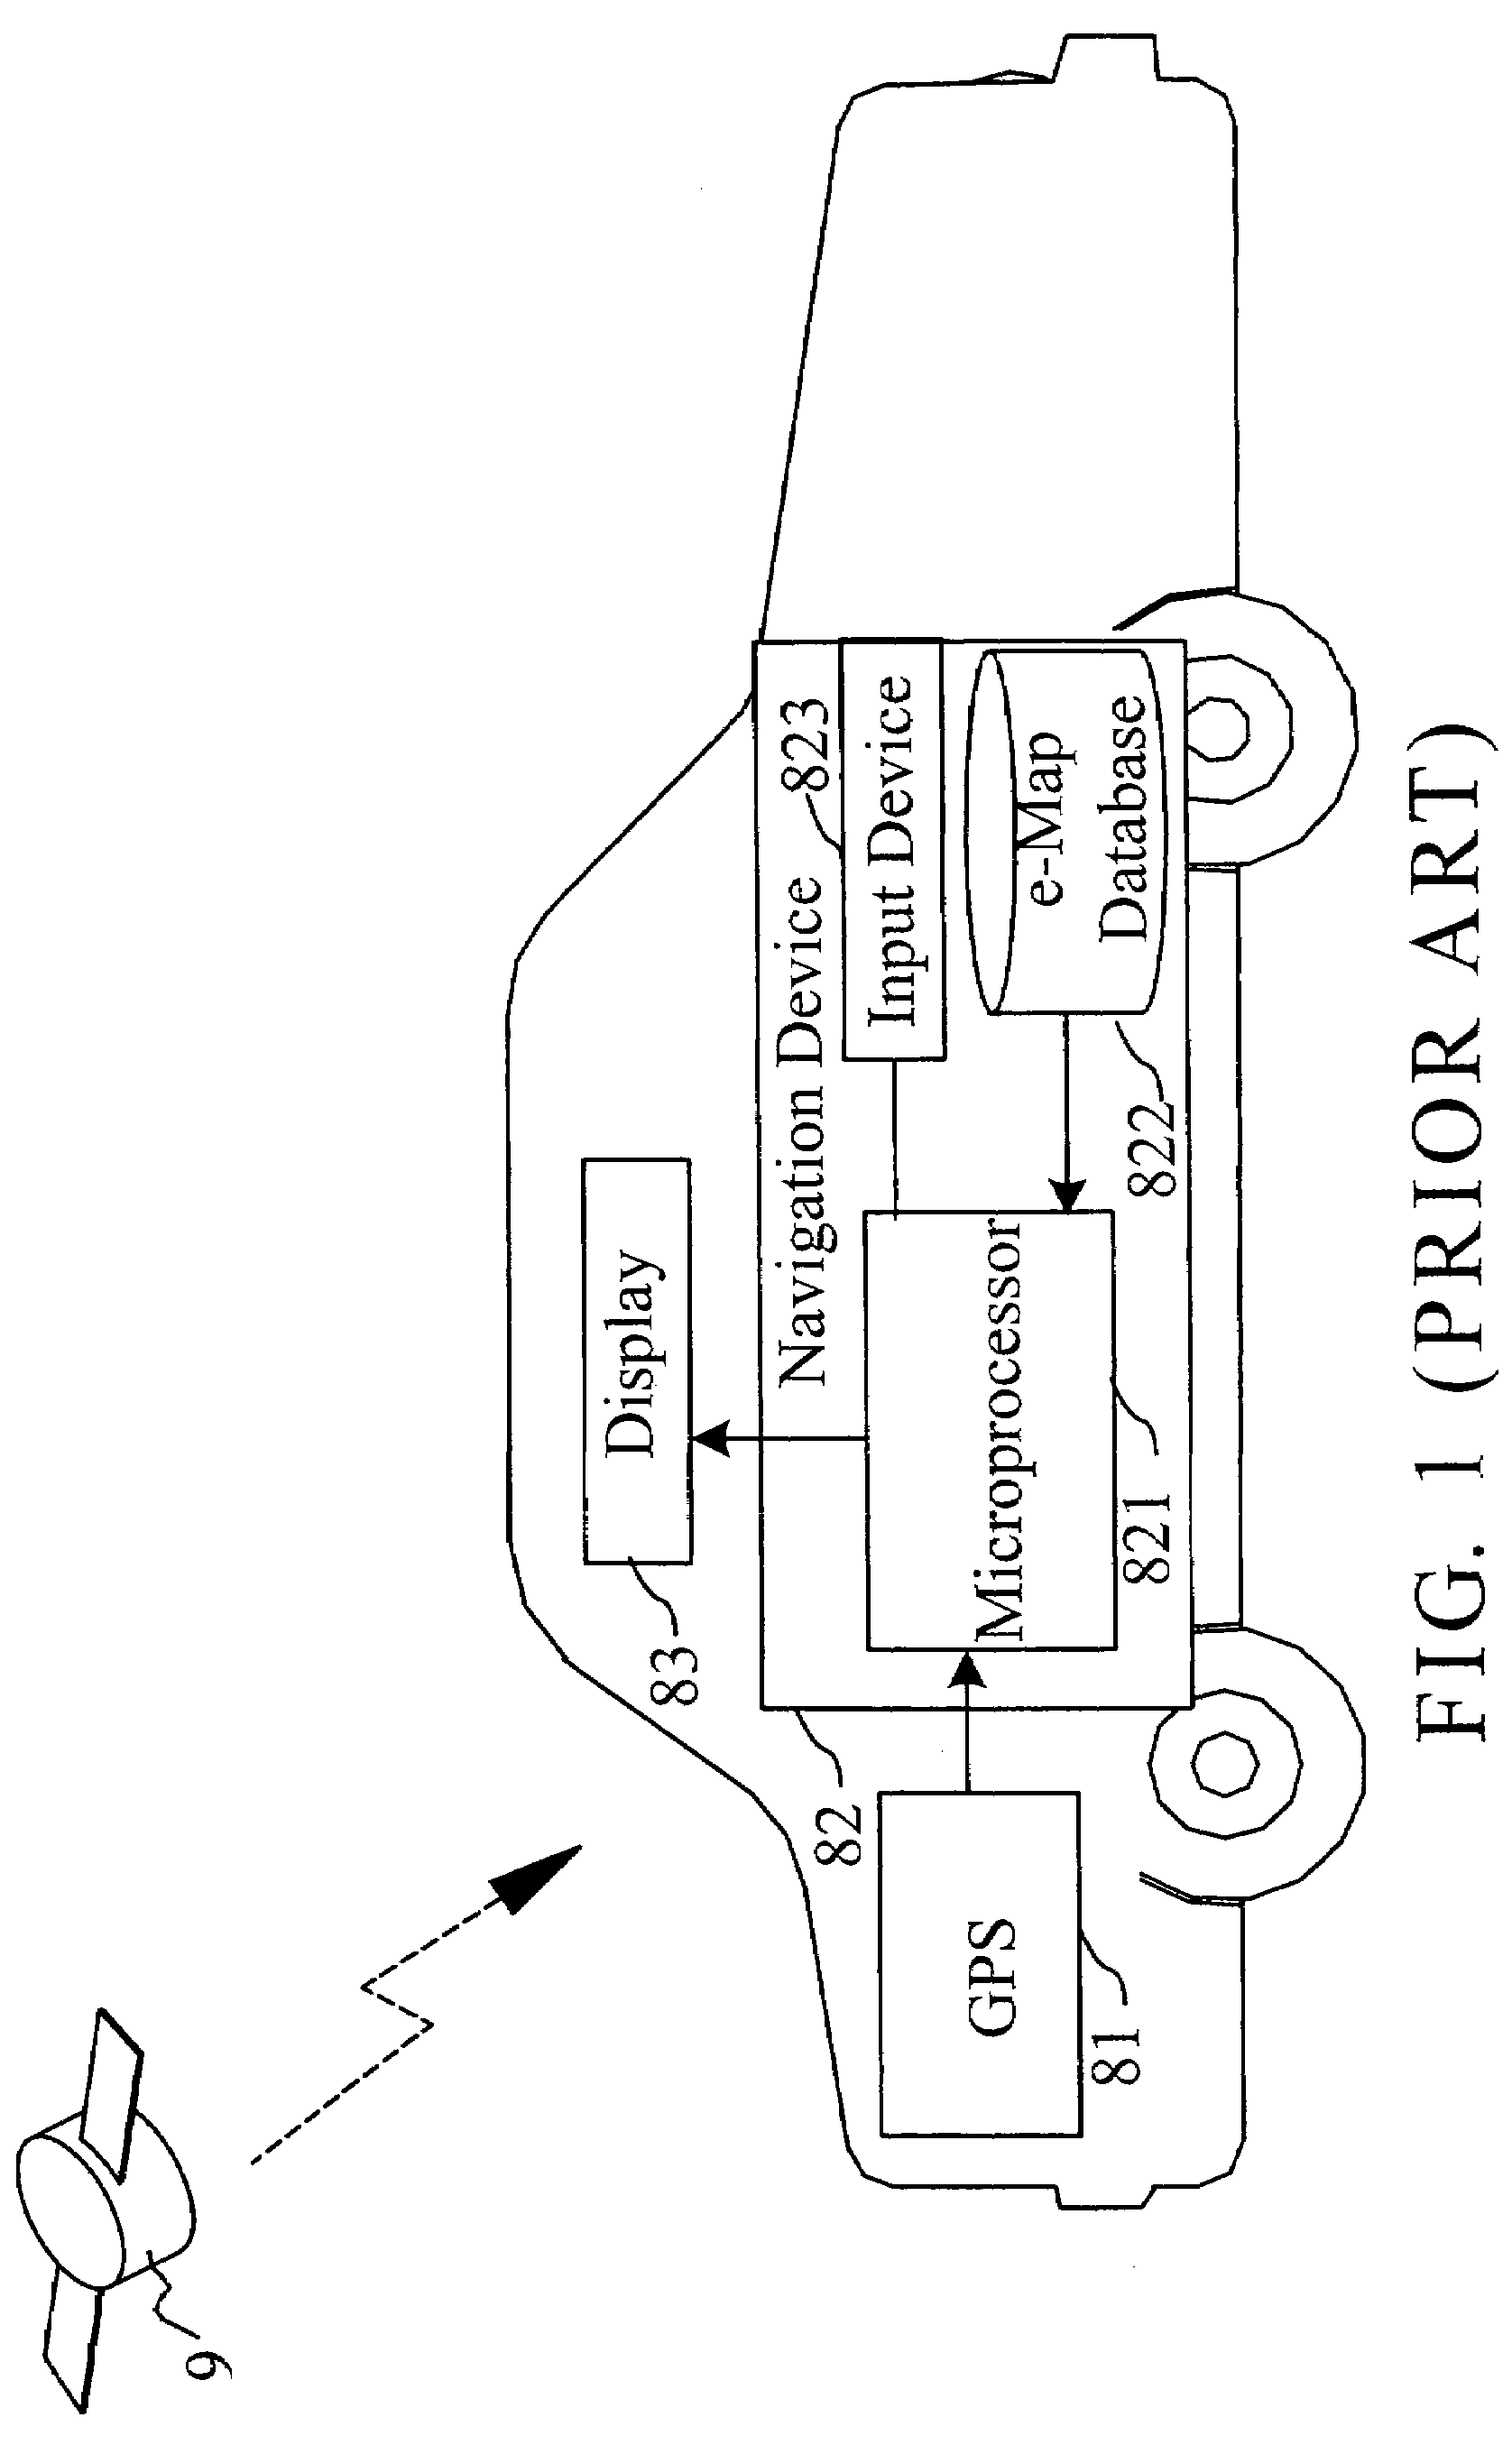 Accurate positioning system for a vehicle and its positioning method